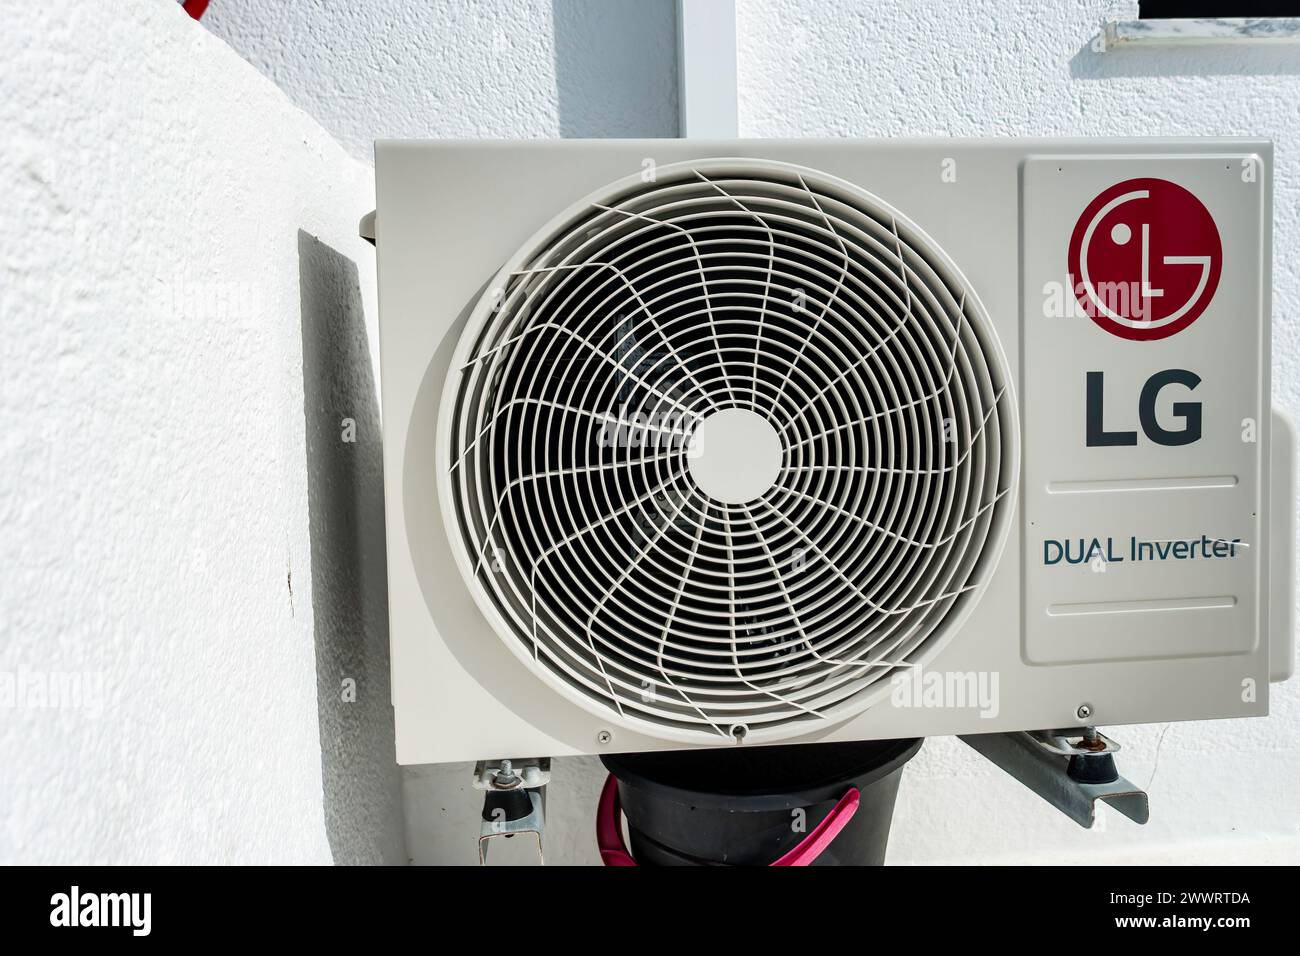 Wall-Mounted LG Dual Inverter Air Conditioning Unit on a Bright Day Stock Photo